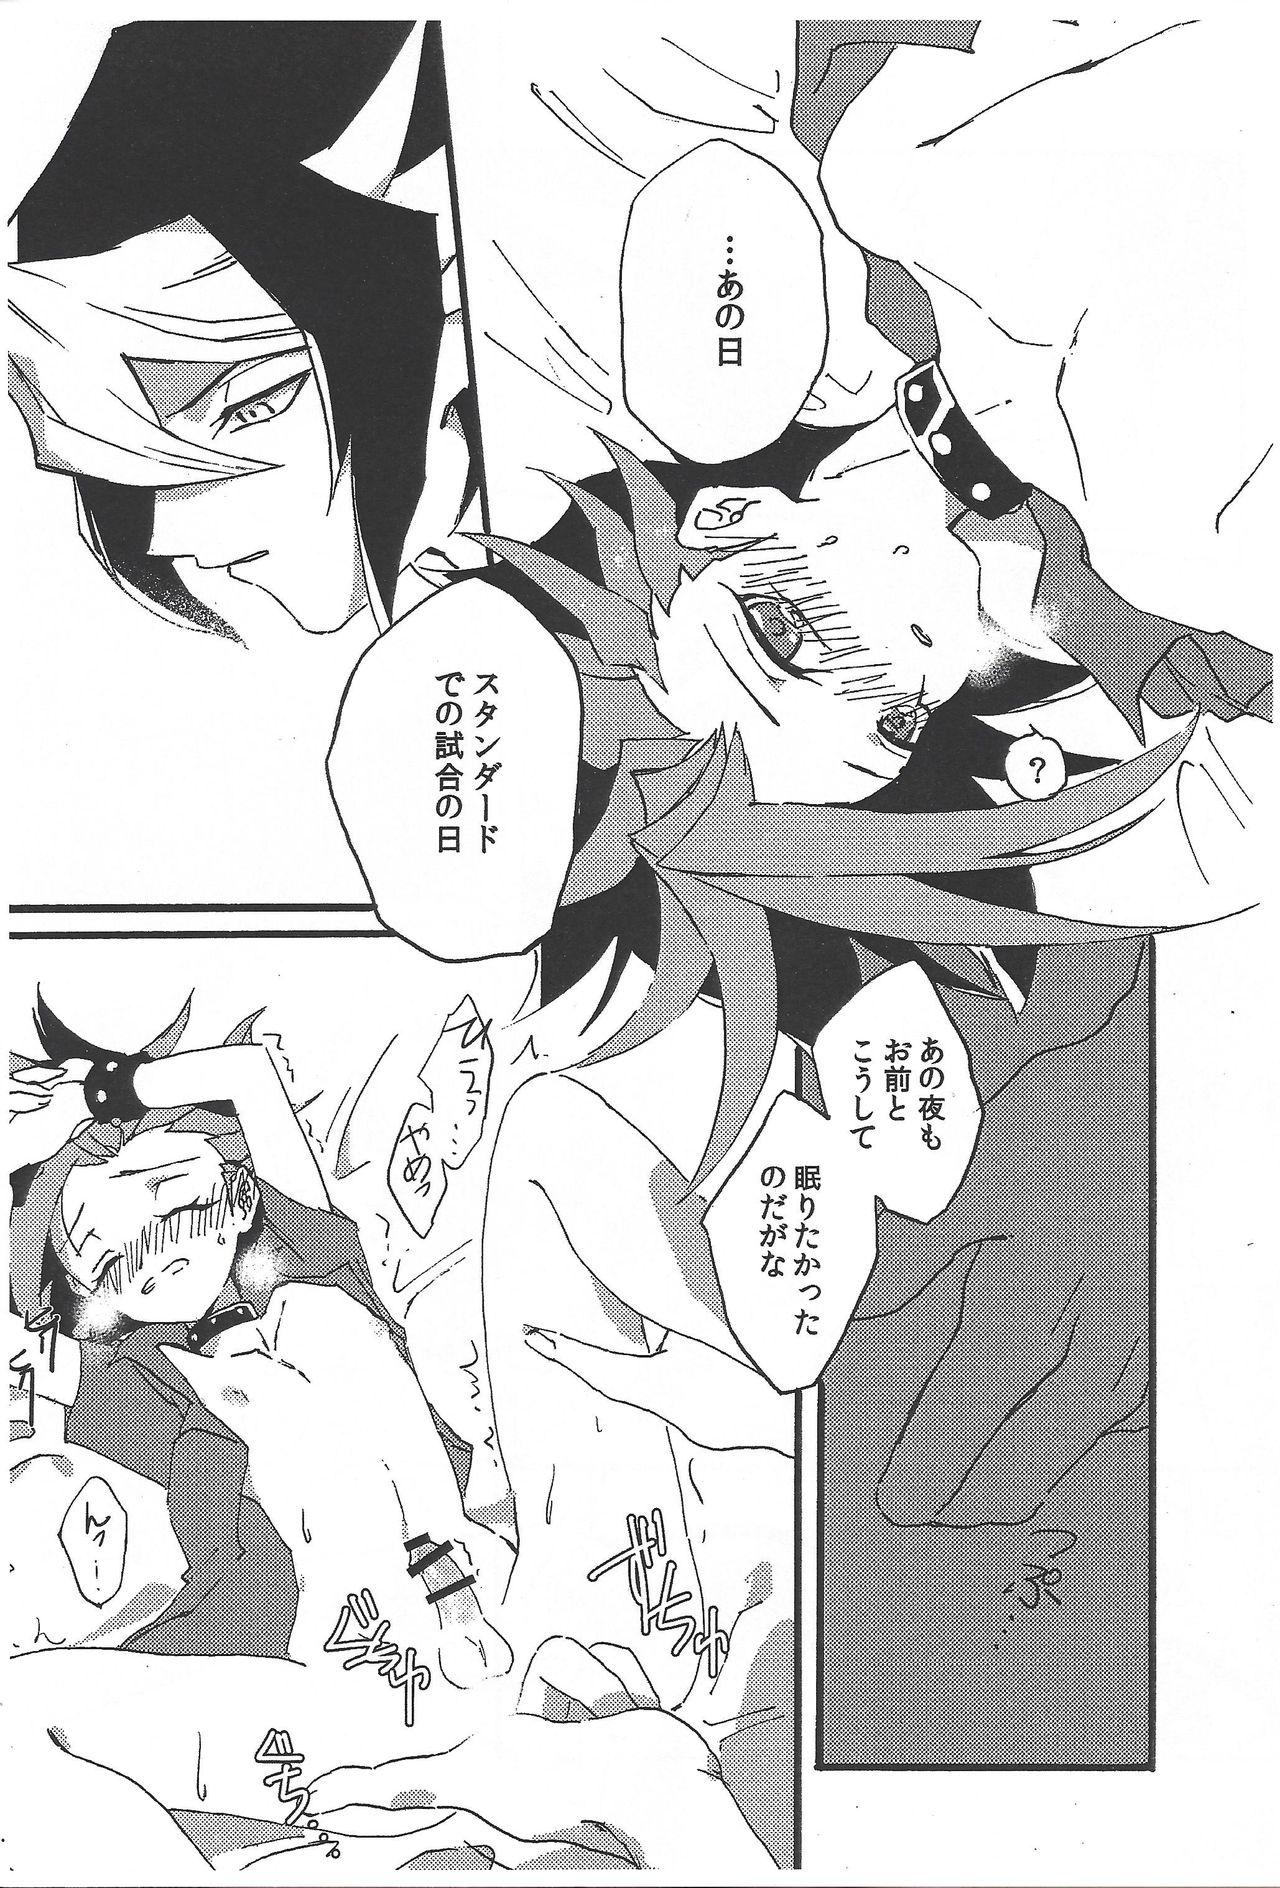 T Girl GHOST ROOM - Yu gi oh arc v Boss - Page 6